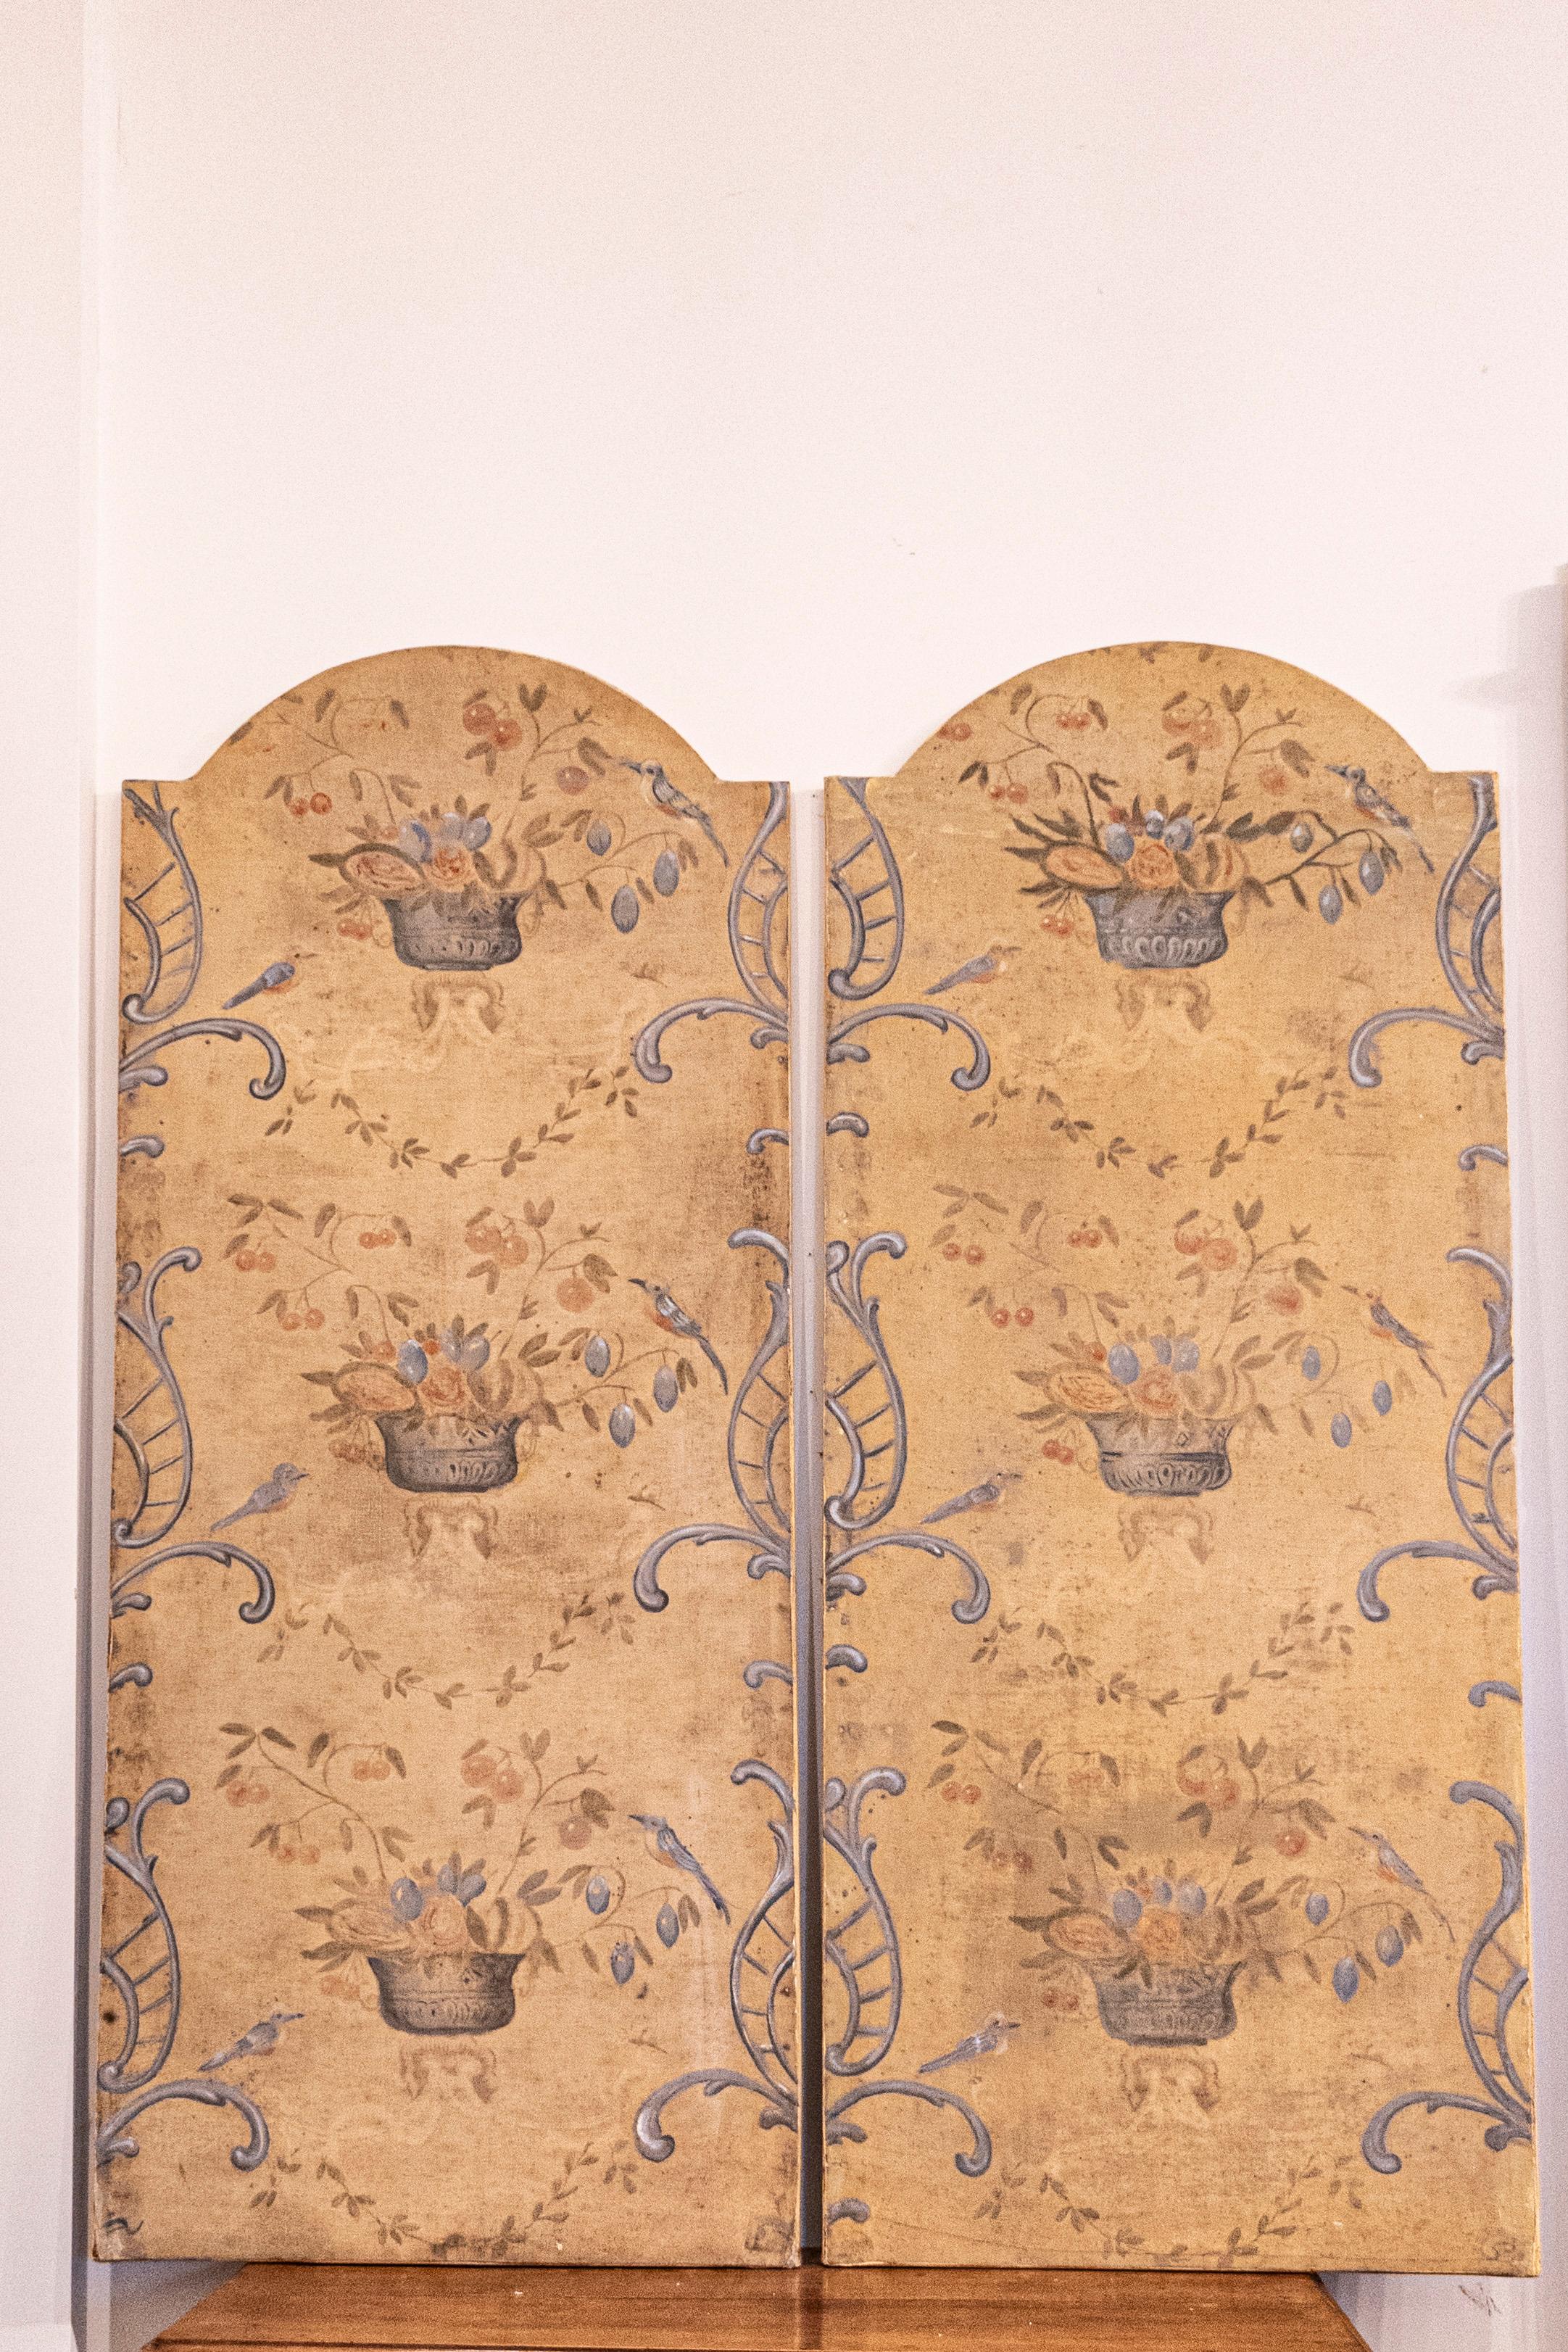 A pair of French 18th century hand-painted decorative panels with silver vases birds in foliage. This enchanting pair of French 18th-century hand-painted decorative panels captures the essence of nature's tranquility and the era's artistic elegance.